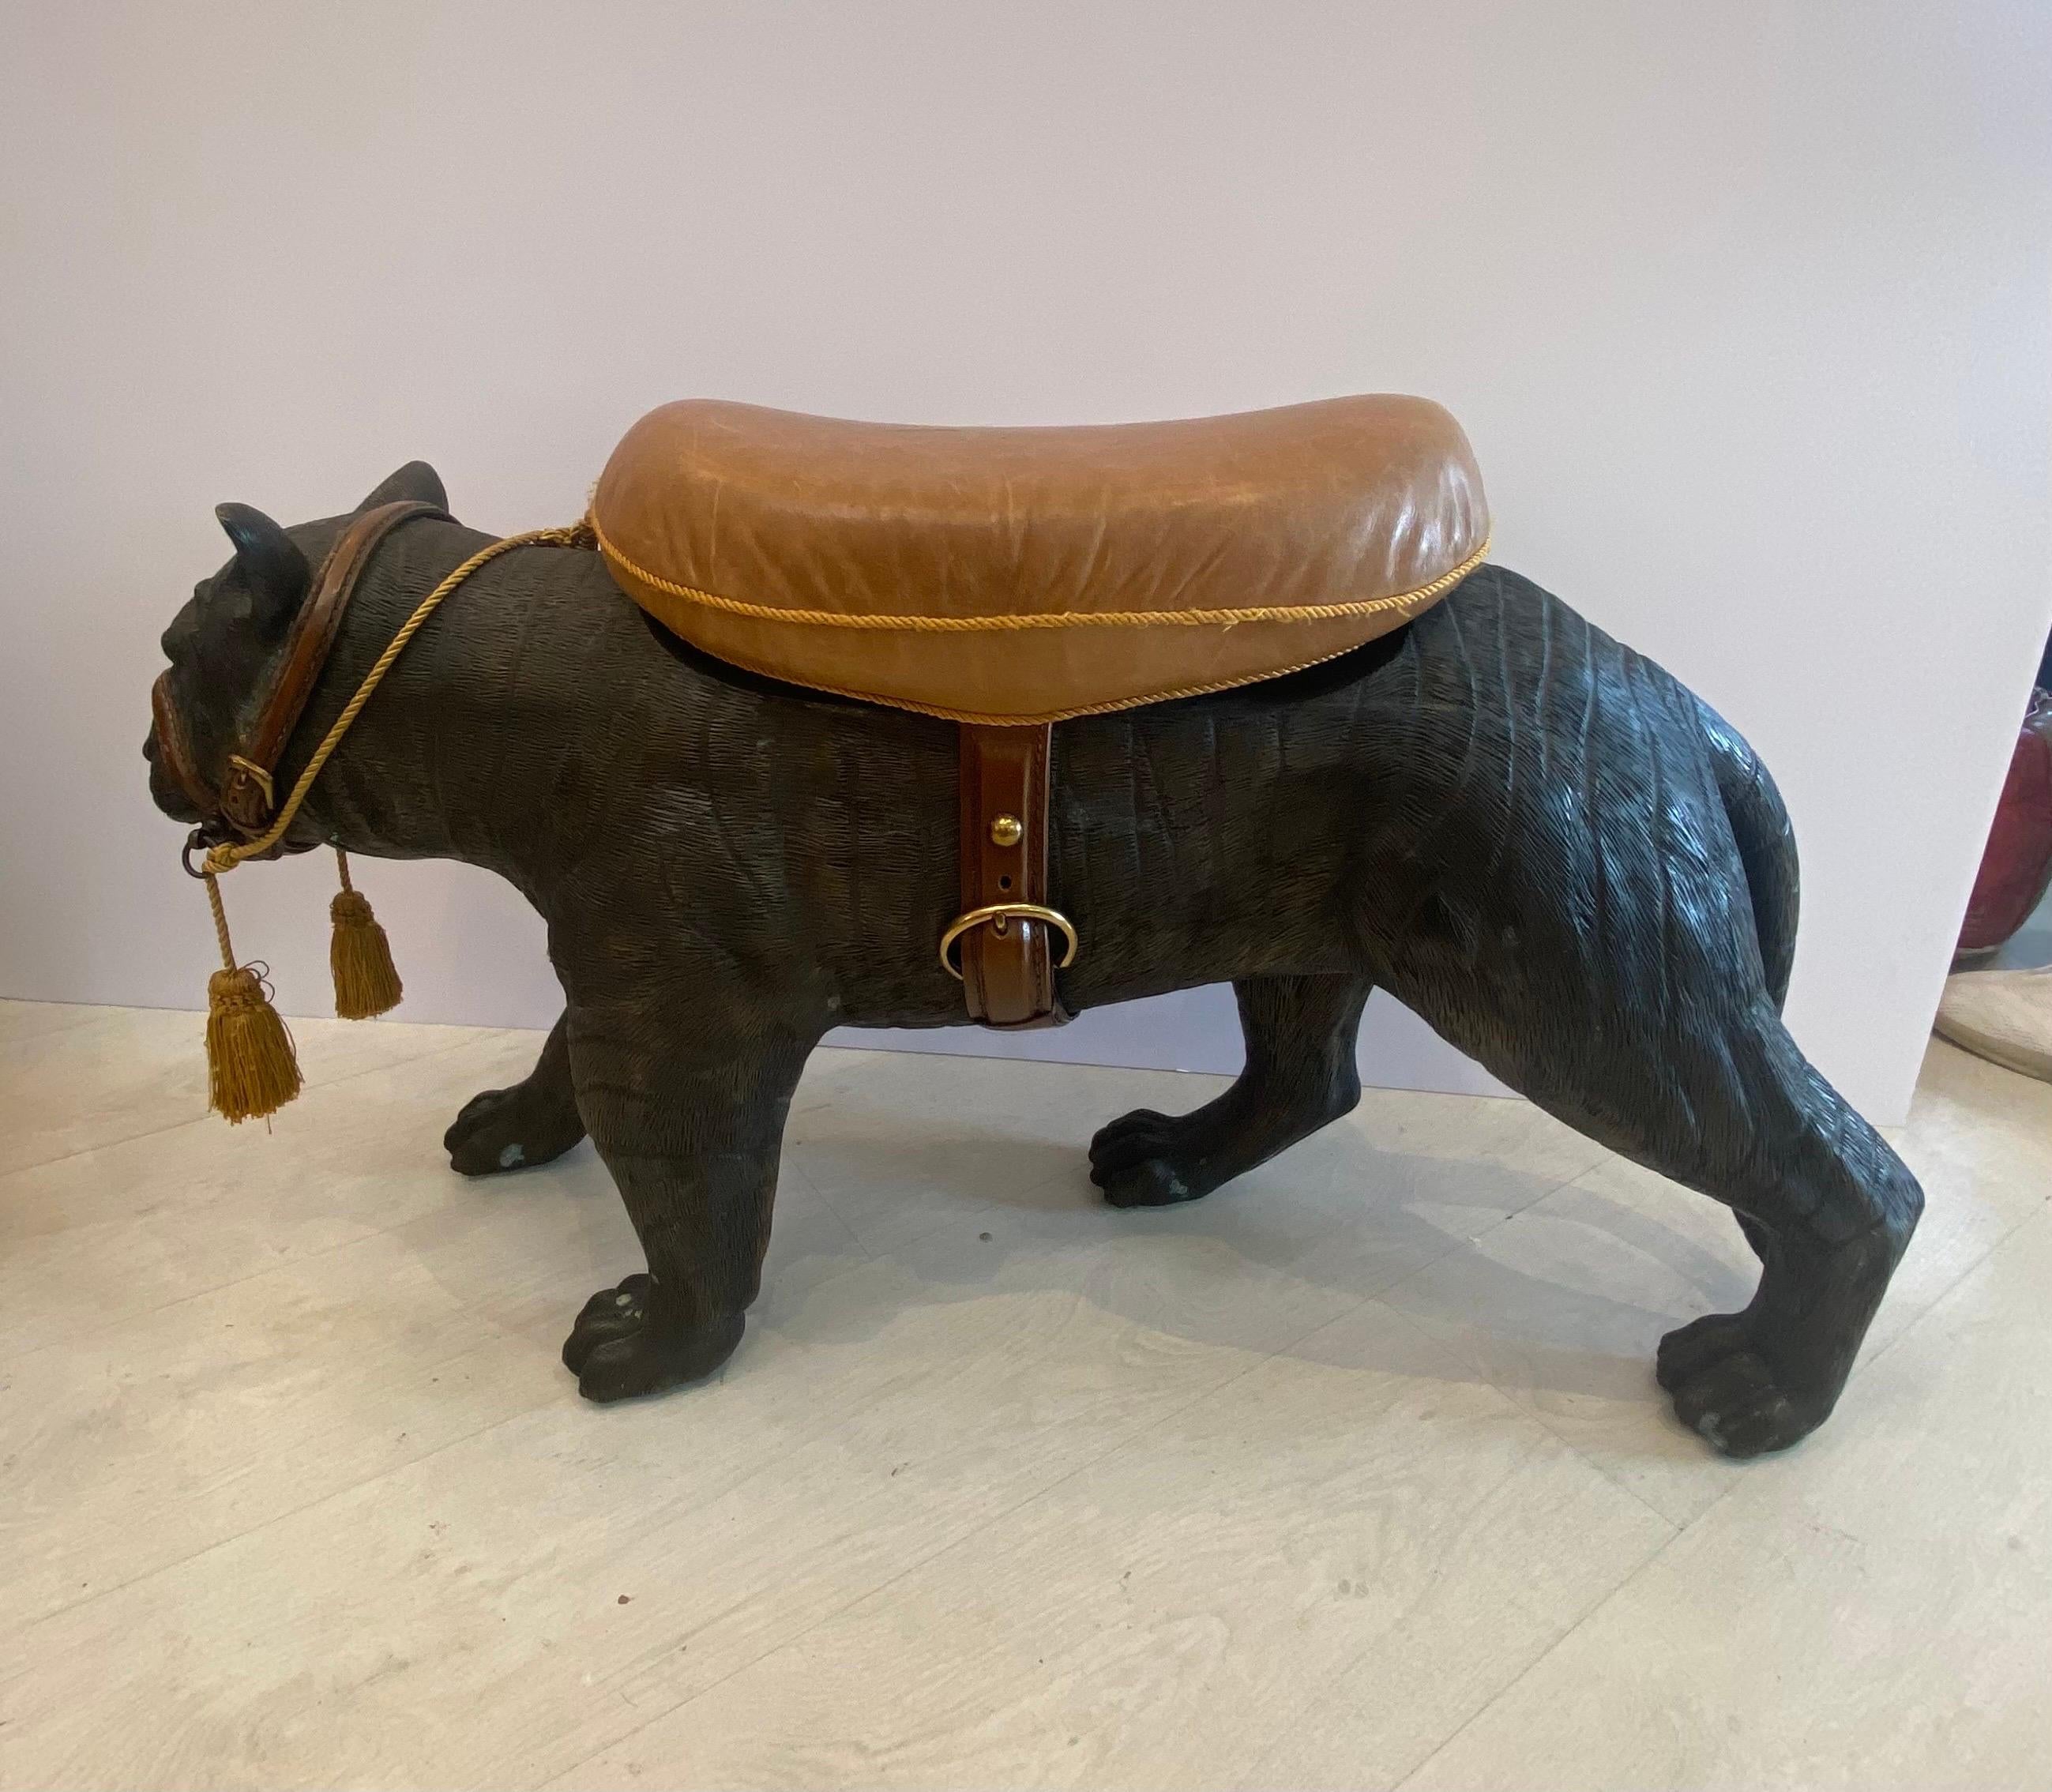 A rare cast bronze Maitland Smith tiger..With leather harness and leather cushioned seat adorned with gold tassels… Dimensions 36 inches long by 13 inches wide by 21 inches tall… labeled Maitland Smith label on the belly.